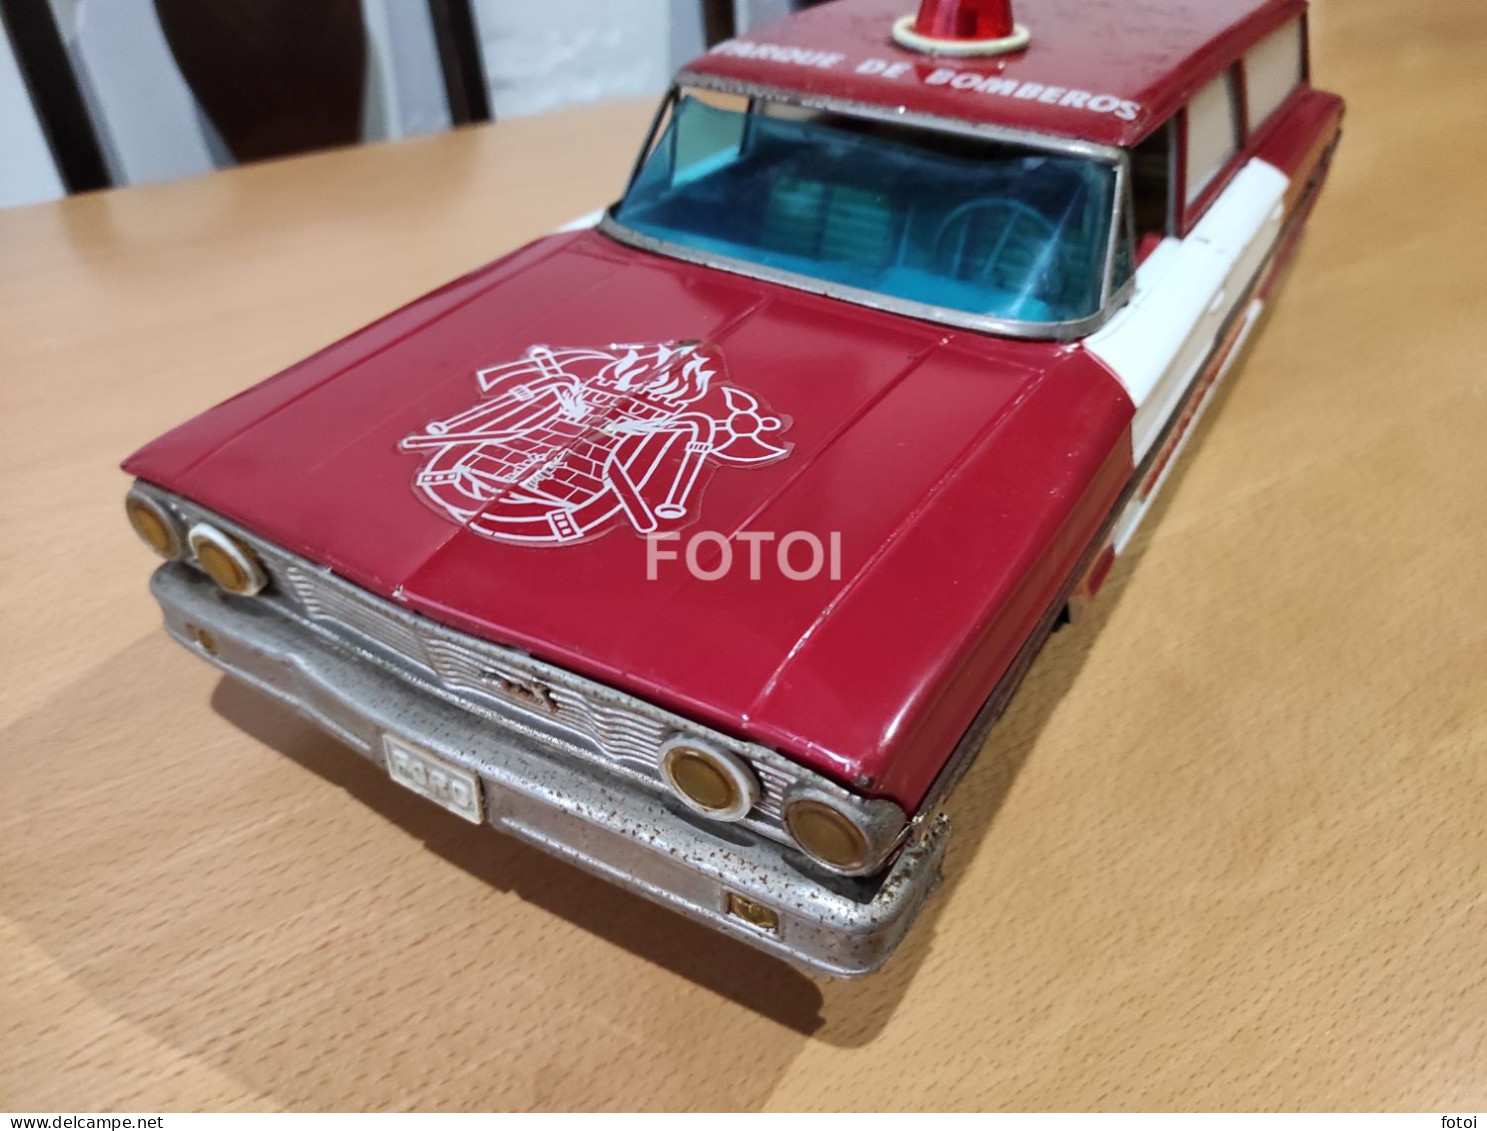 LARGE TIN CAR FORD GALAXIE FIRE CHIEF AMBULANCE RICO SPAIN ESPANA BATTERY OPERATED - Scale 1:160